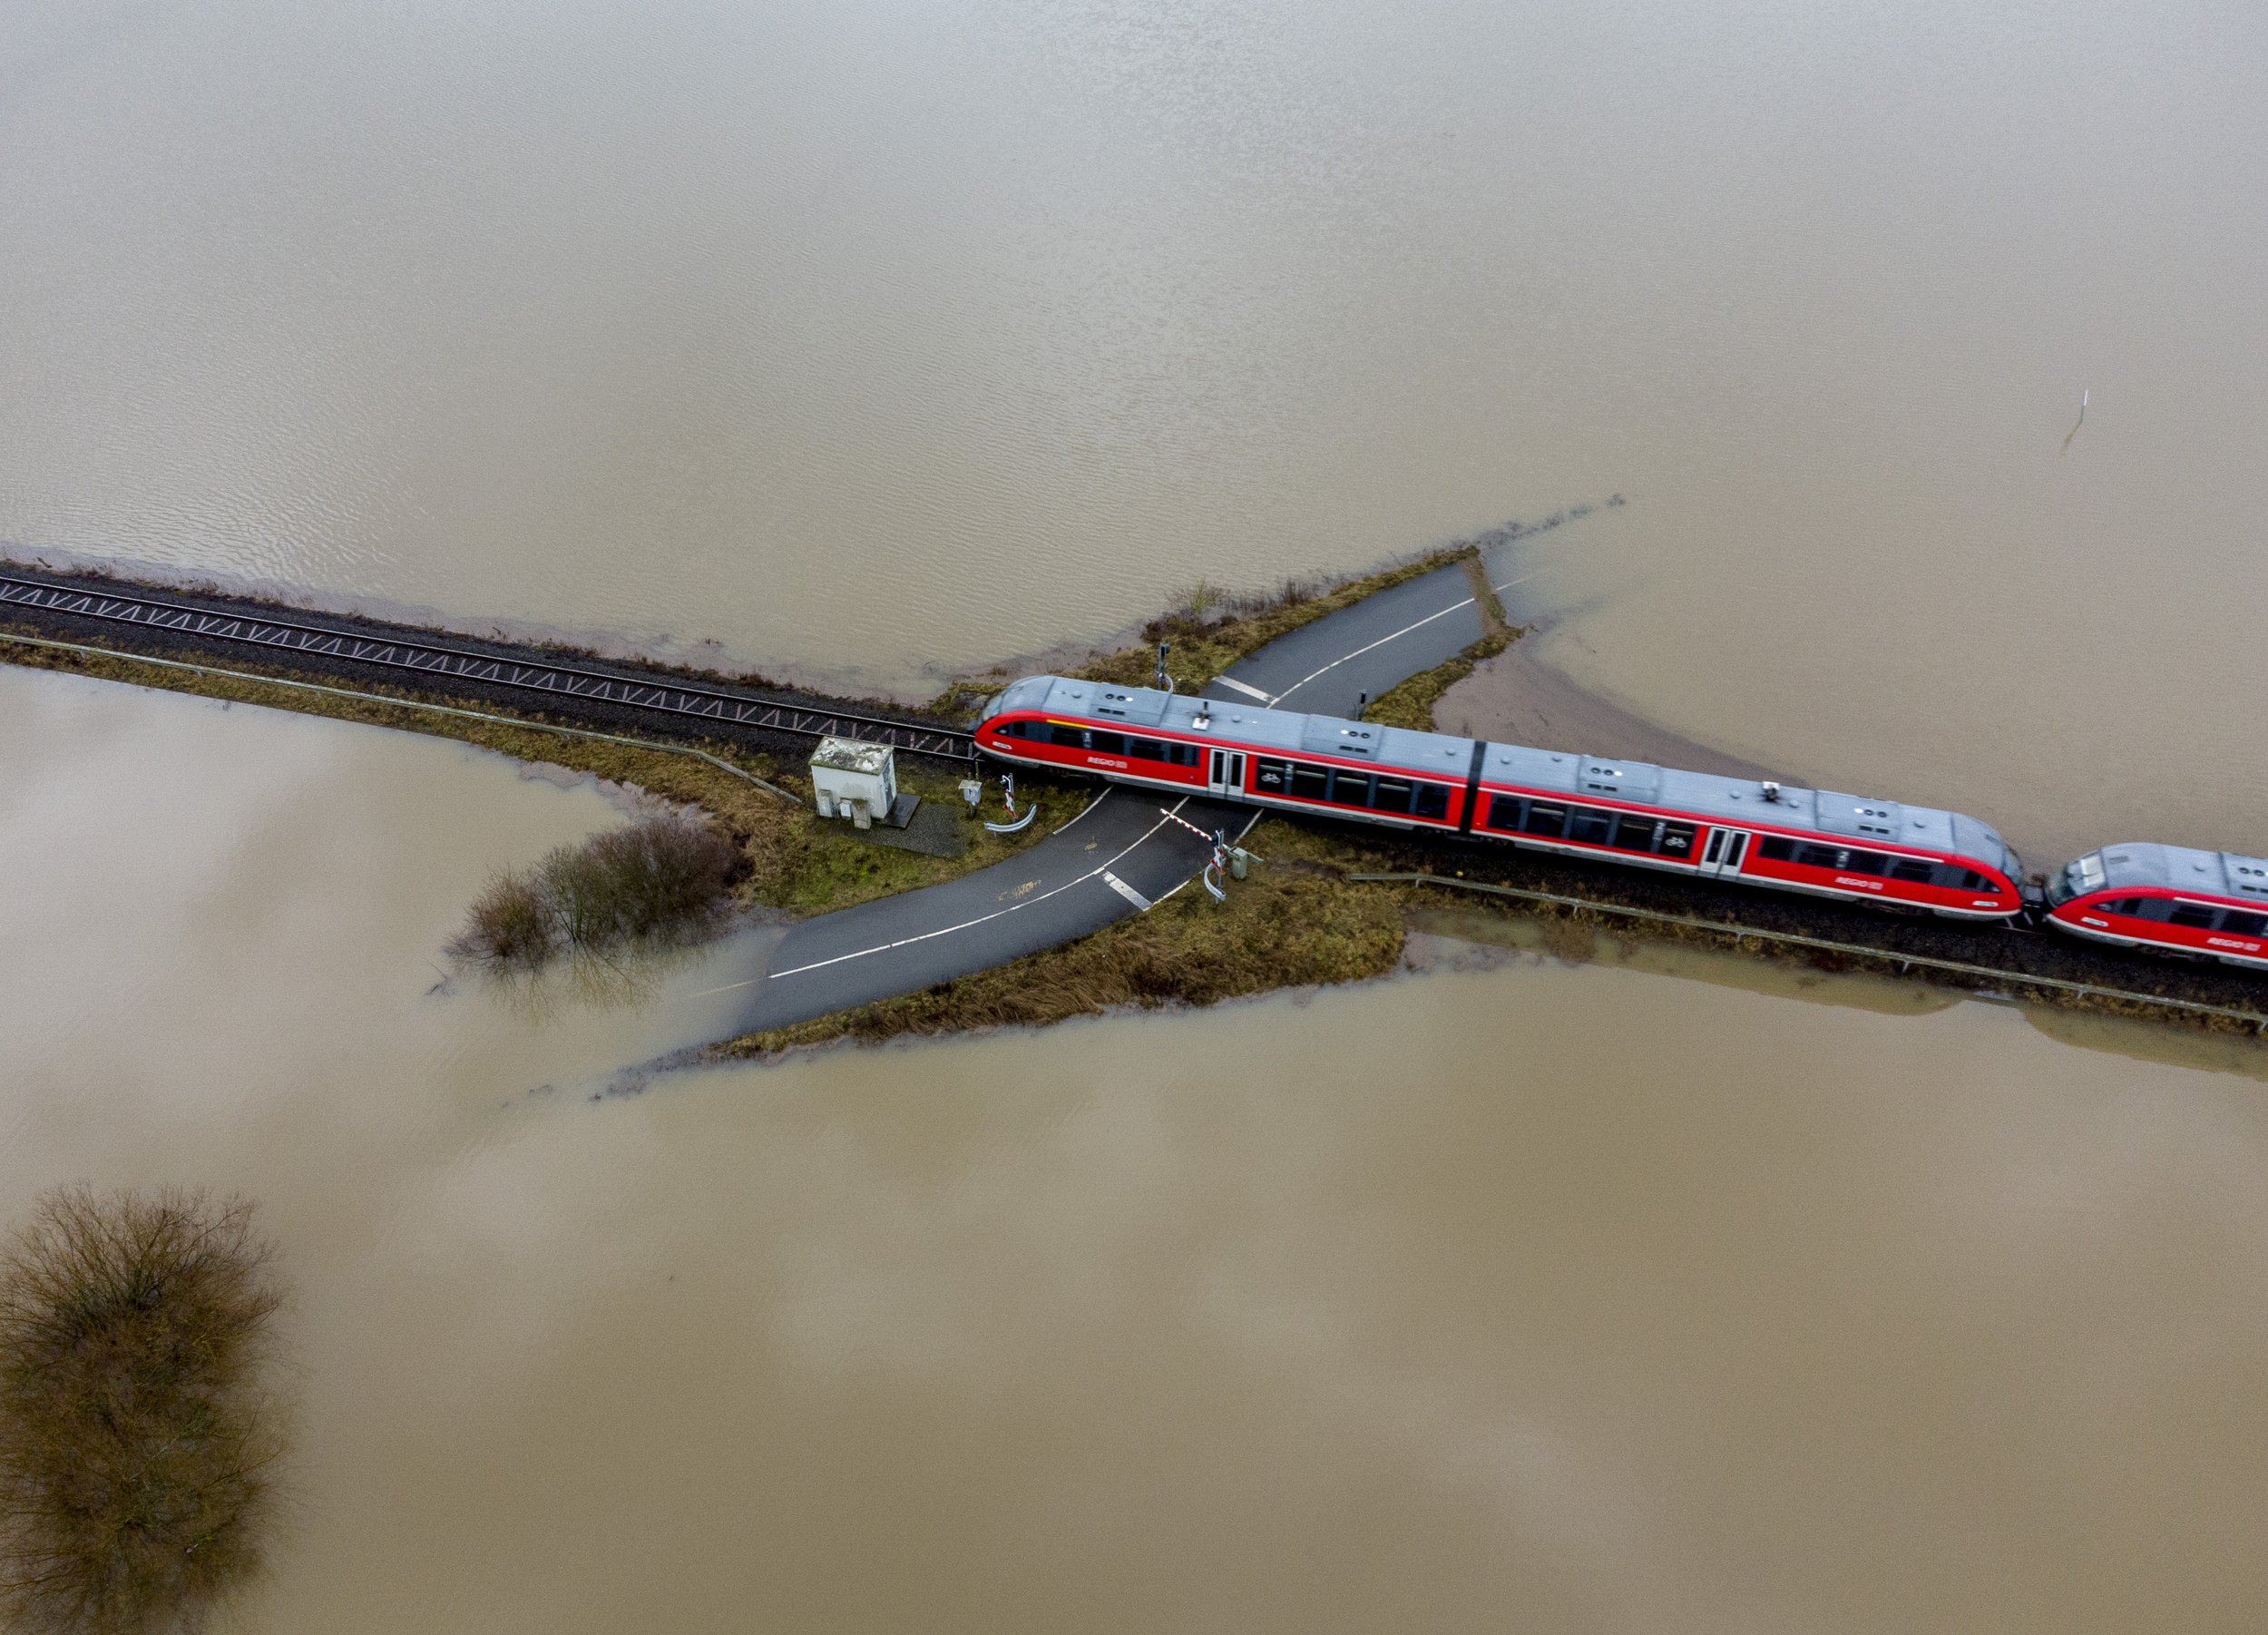  A train passes a railroad crossing that is surrounded by floodwaters from rain and melting snow in Nidderau near Frankfurt, Germany, on Feb. 3, 2021. (AP Photo/Michael Probst) 